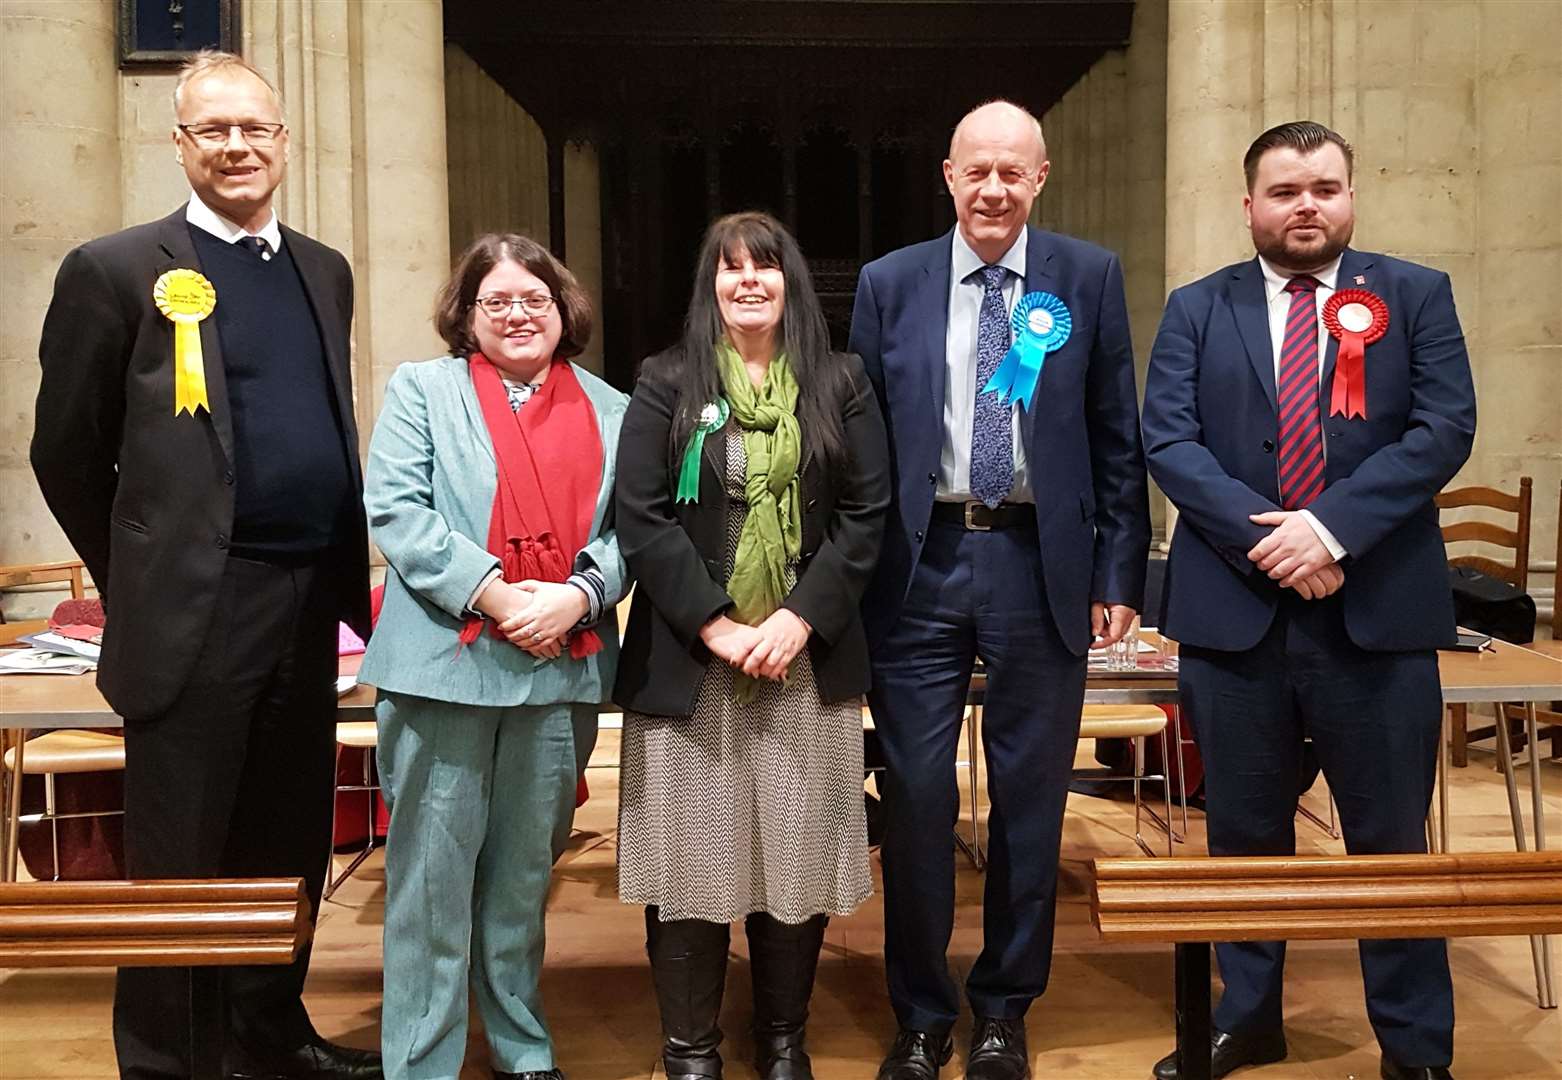 The Ashford candidates pictured on Monday night